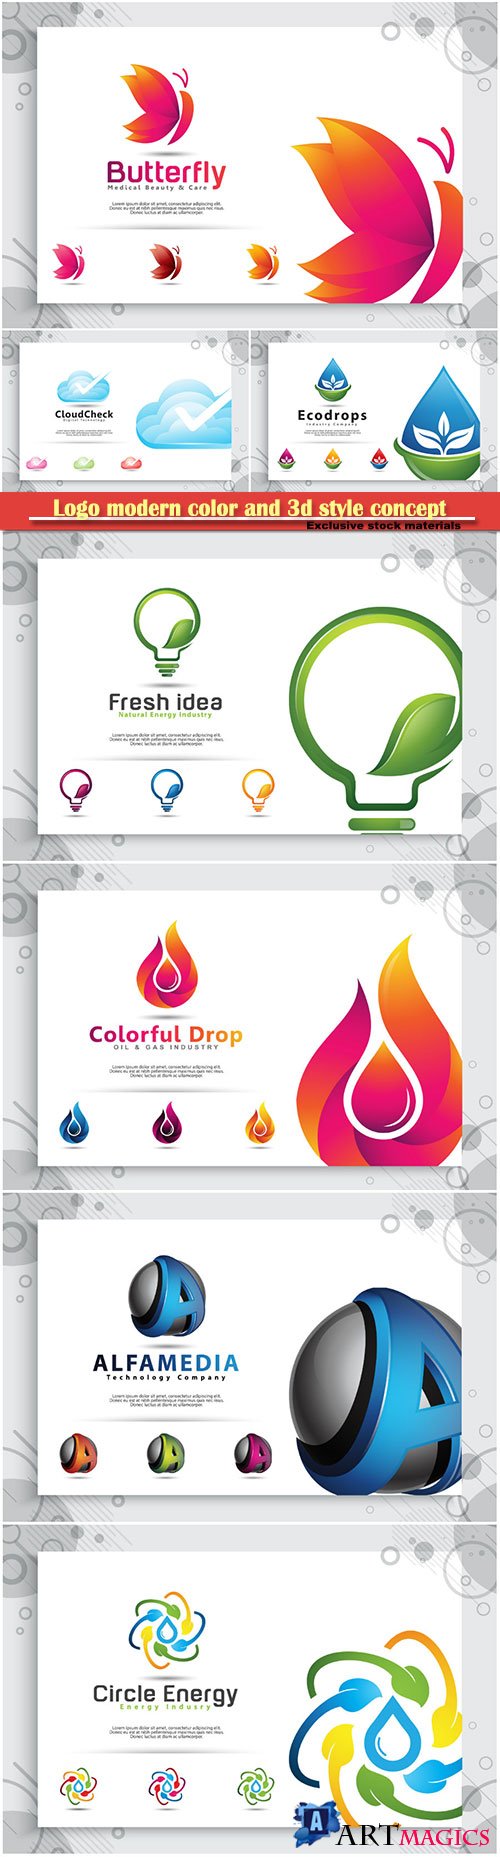 Logo modern color and 3d style concept, business and company identity # 2